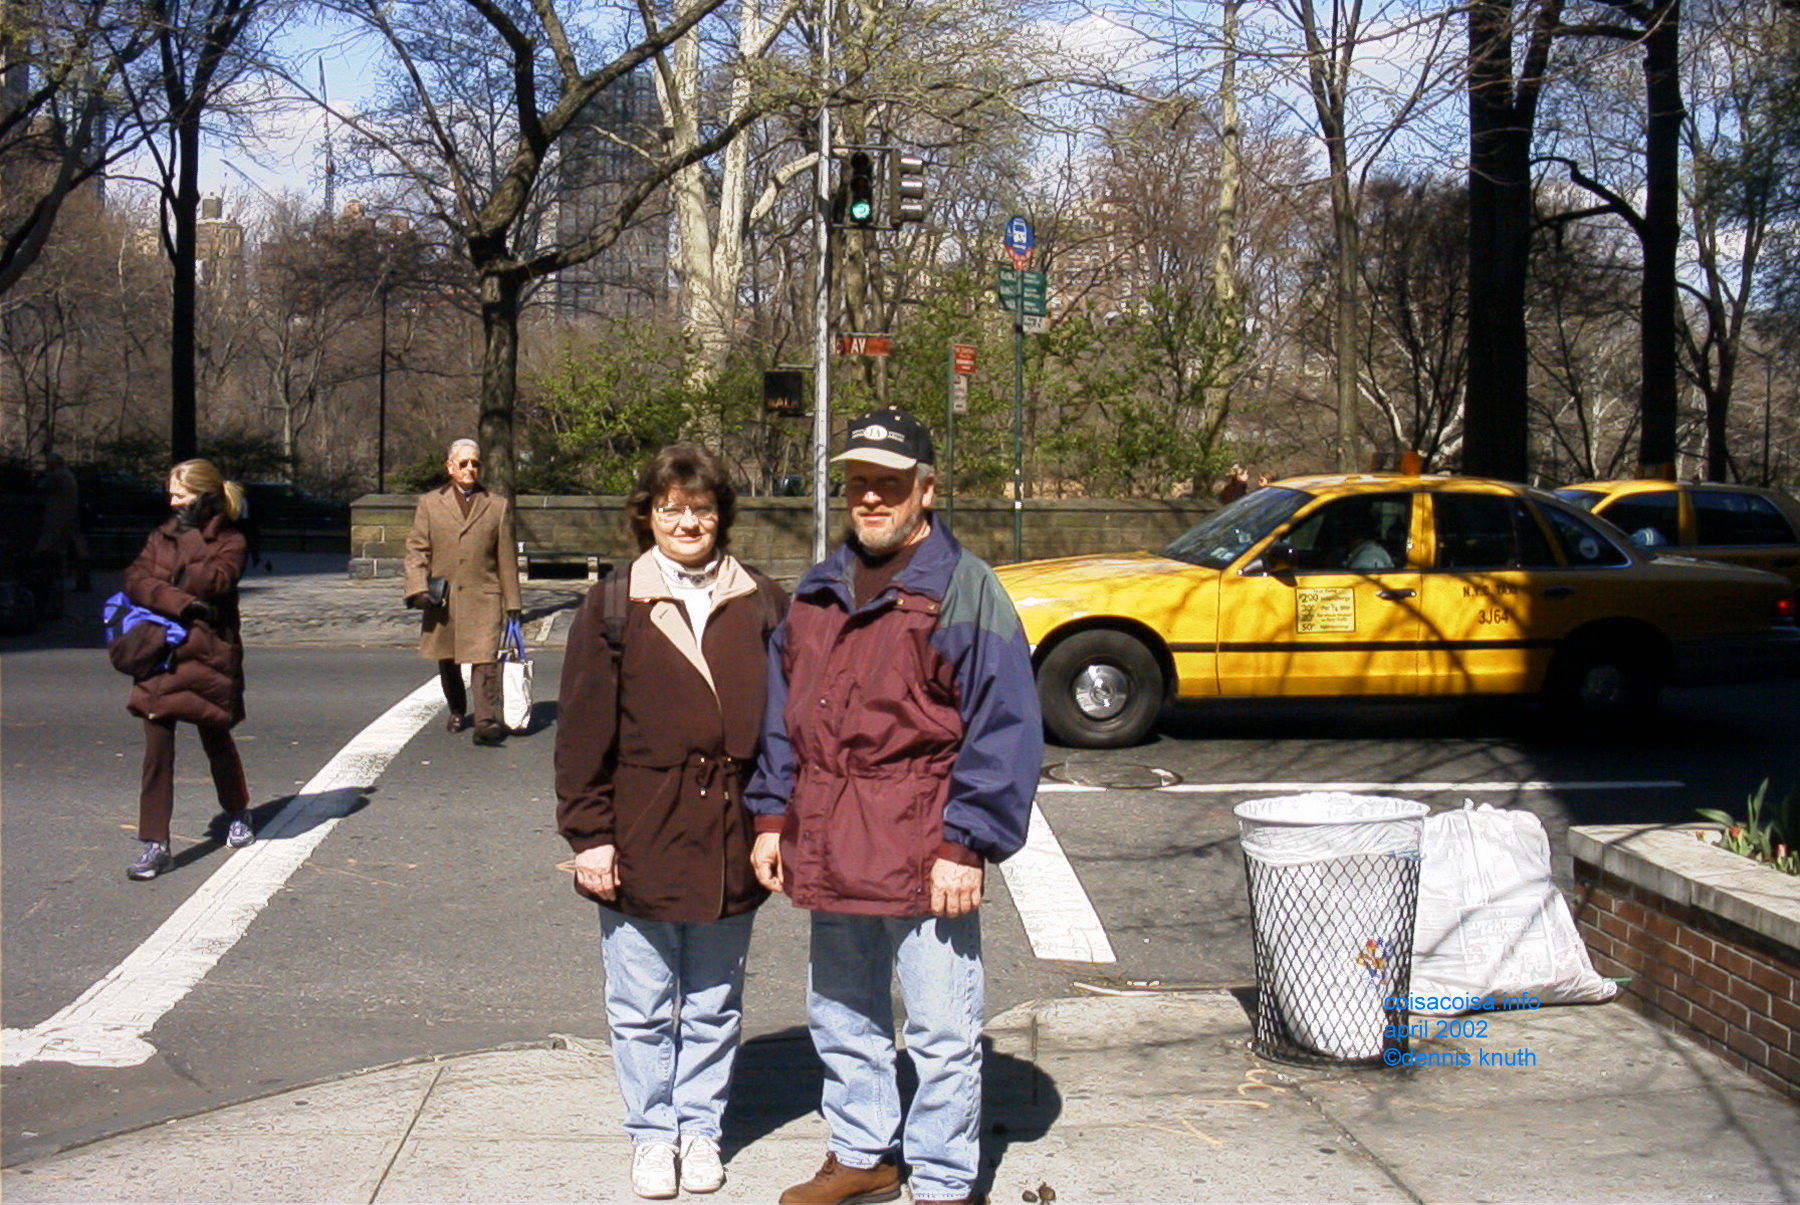 Crossing Fifth Avenue in the Springtime in 2002